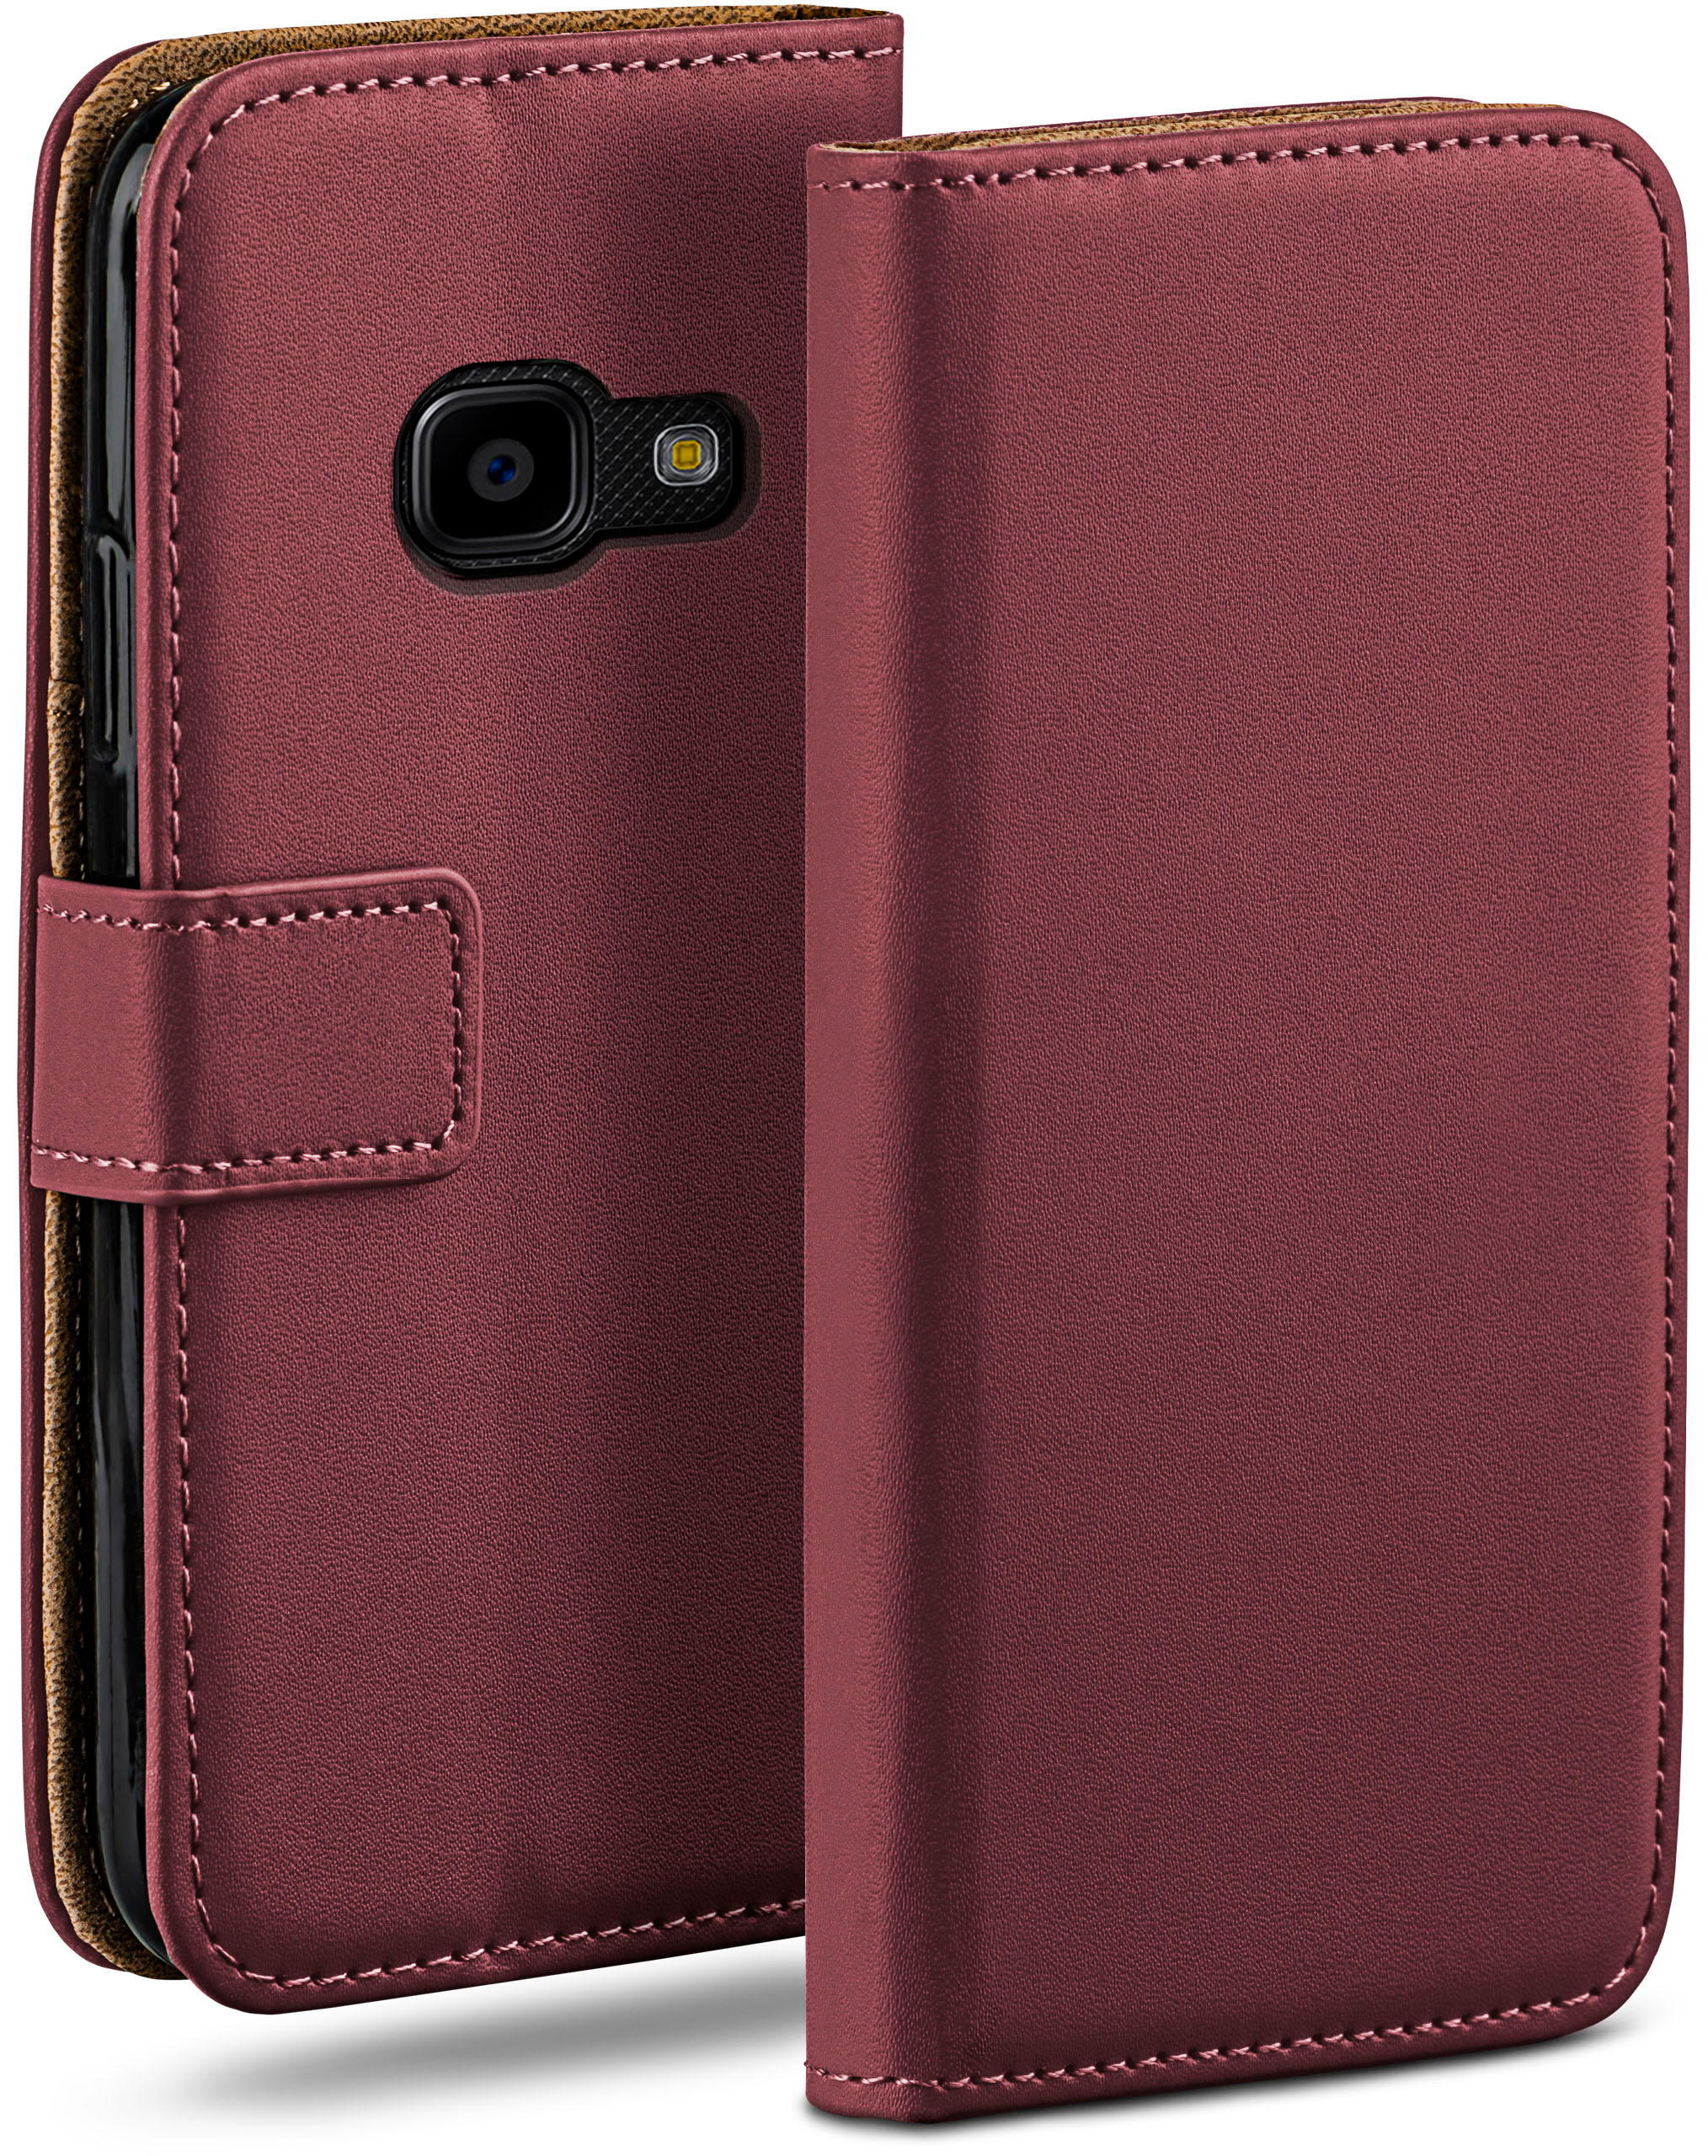 Galaxy MOEX Xcover Book Case, 4, Samsung, Maroon-Red Bookcover,